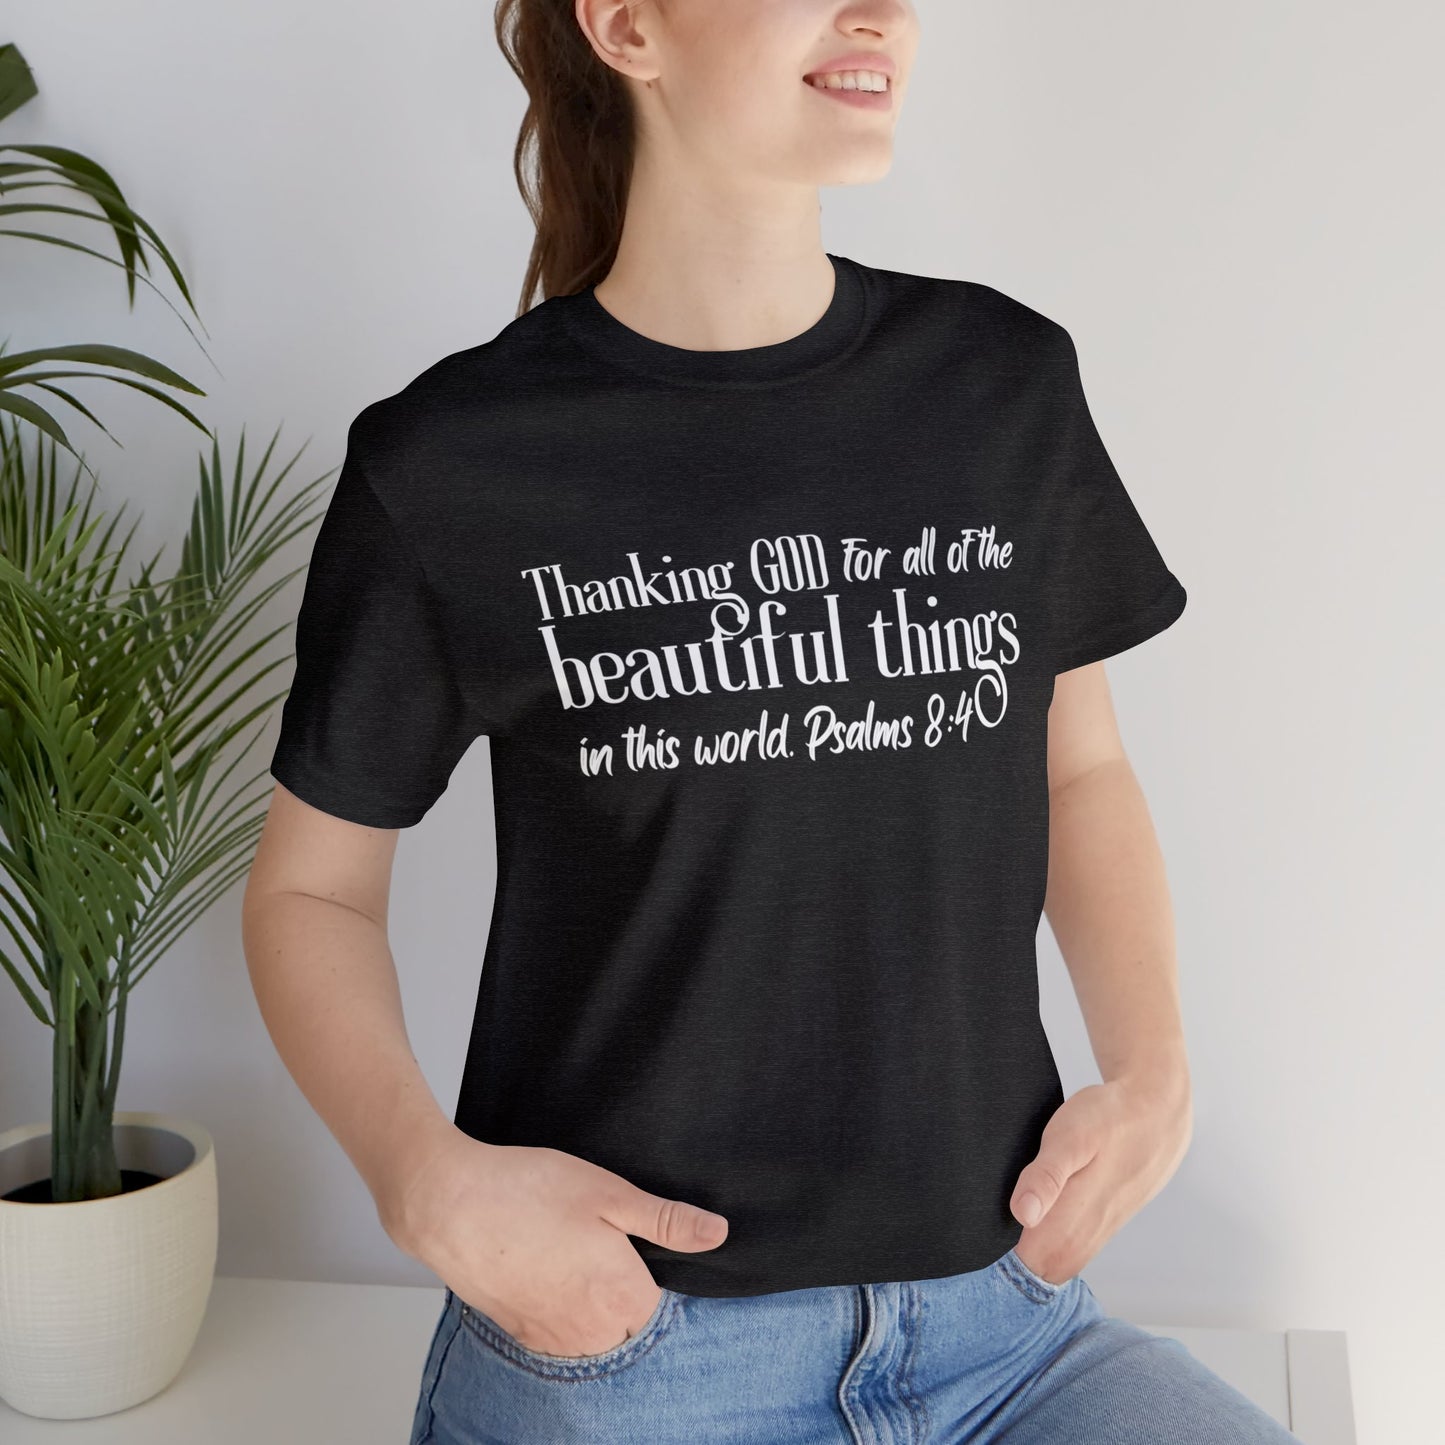 Beautiful Things, Express Delivery, Christian T-shirt for Men and Women